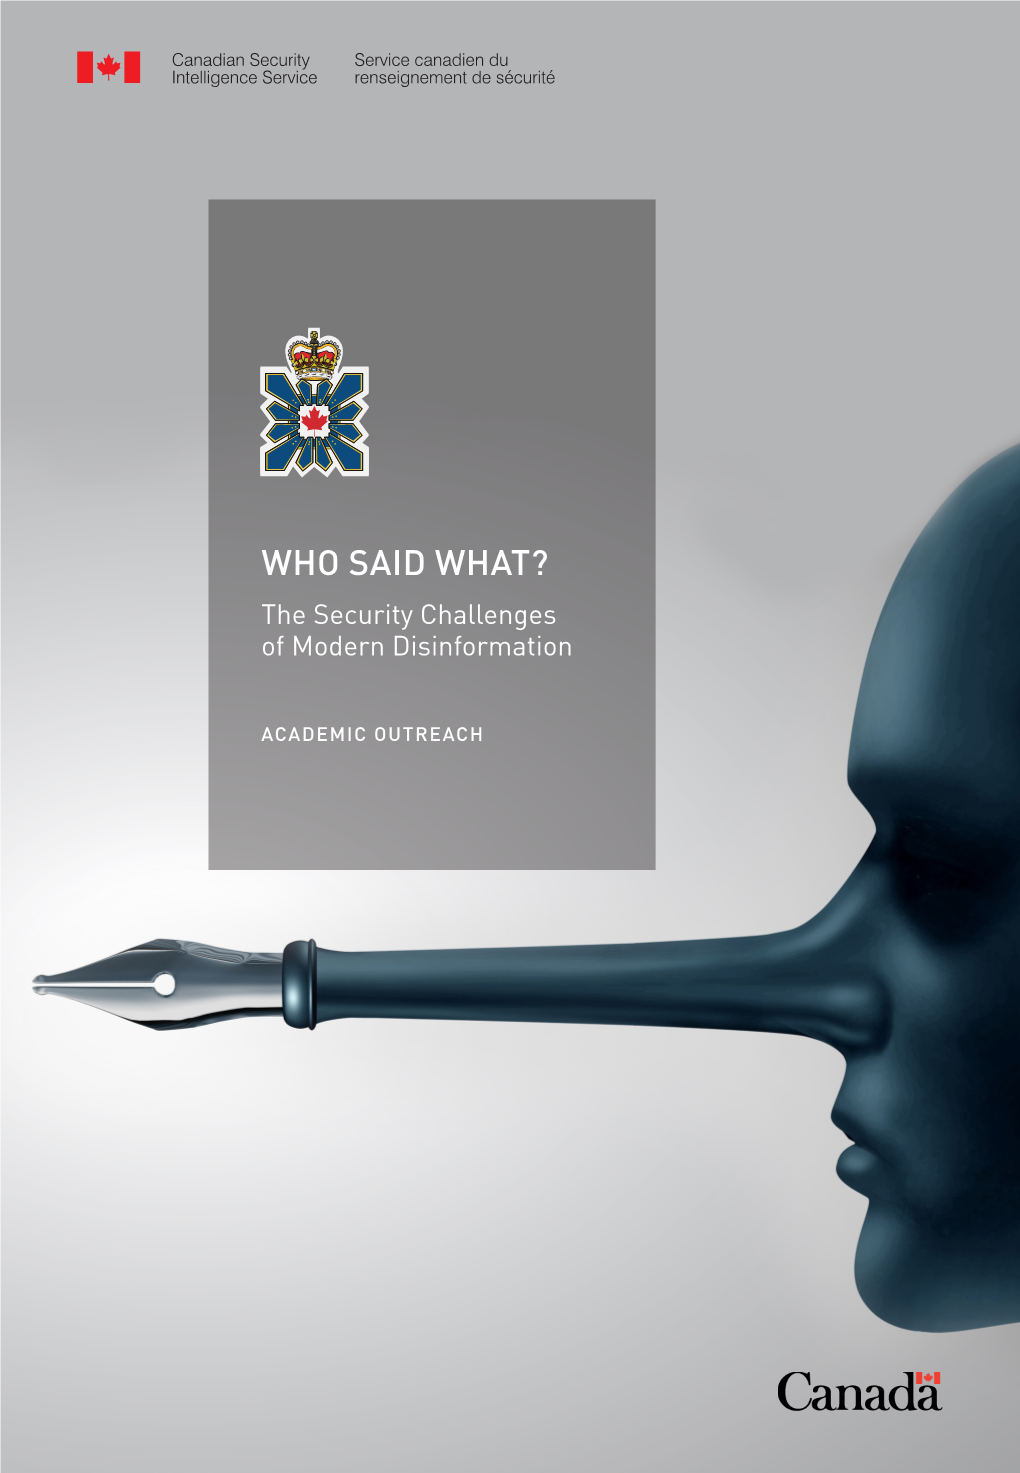 WHO SAID WHAT? the Security Challenges of Modern Disinformation